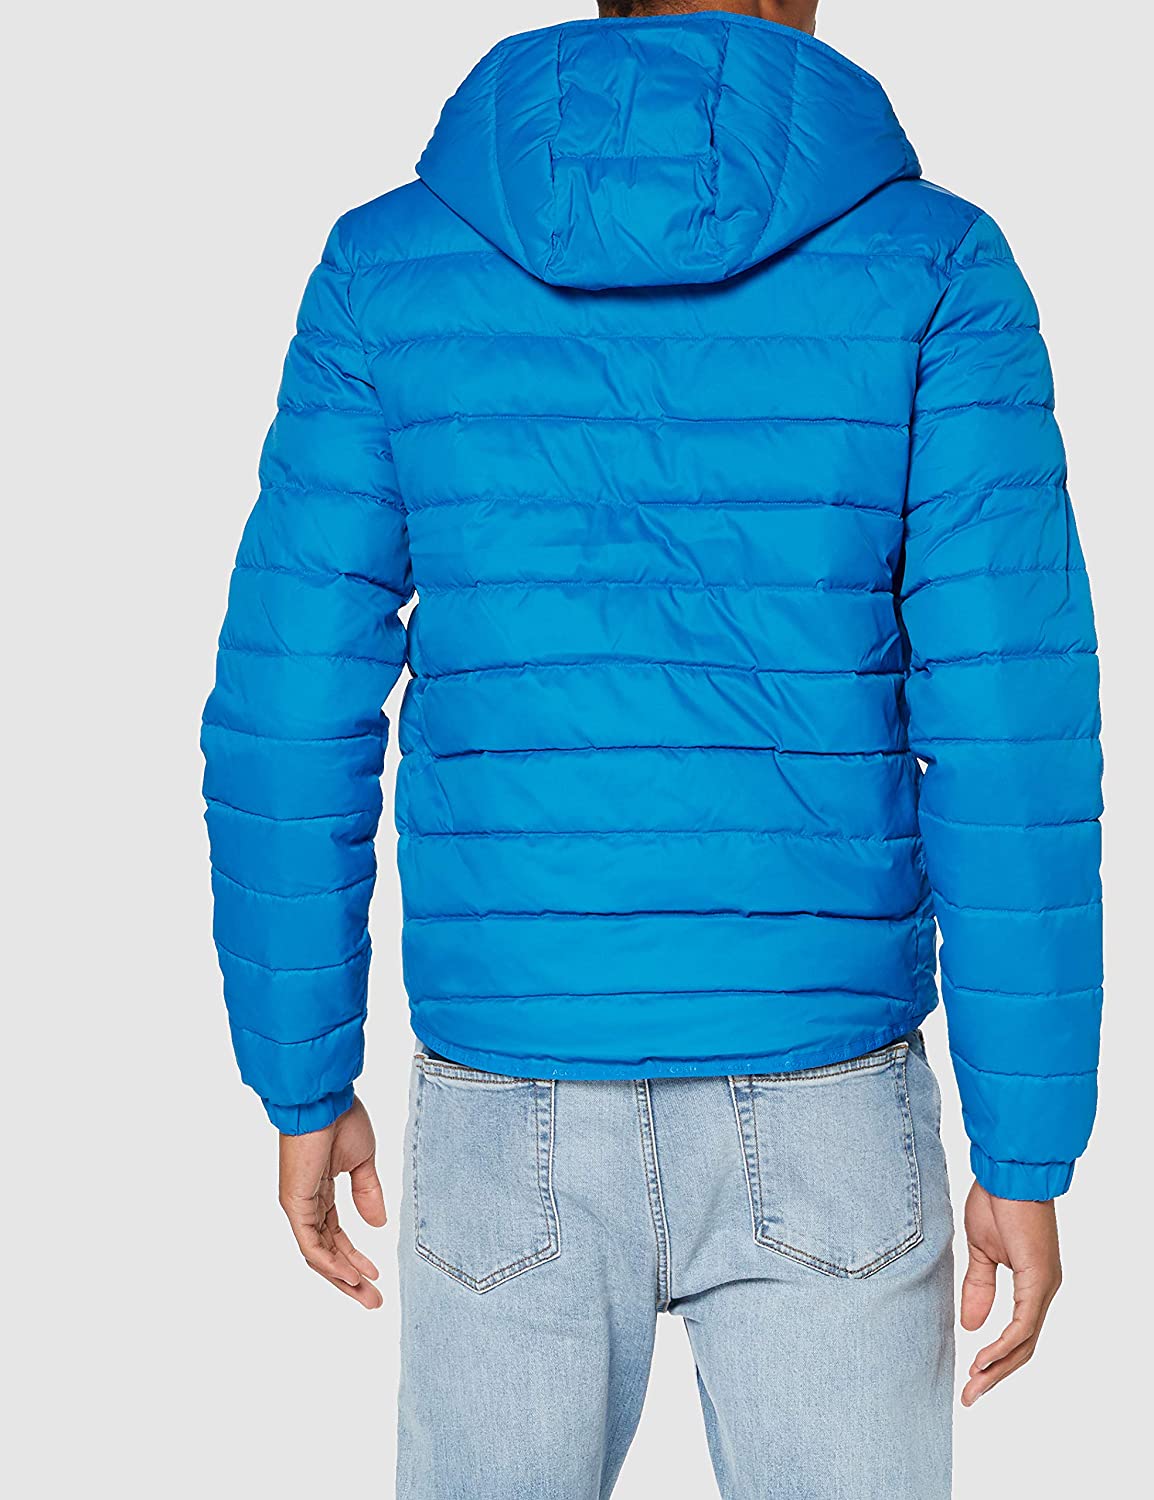 Lacoste Men's Lacoste SPORT Hooded Water-Resistant Quilted Jacket ...